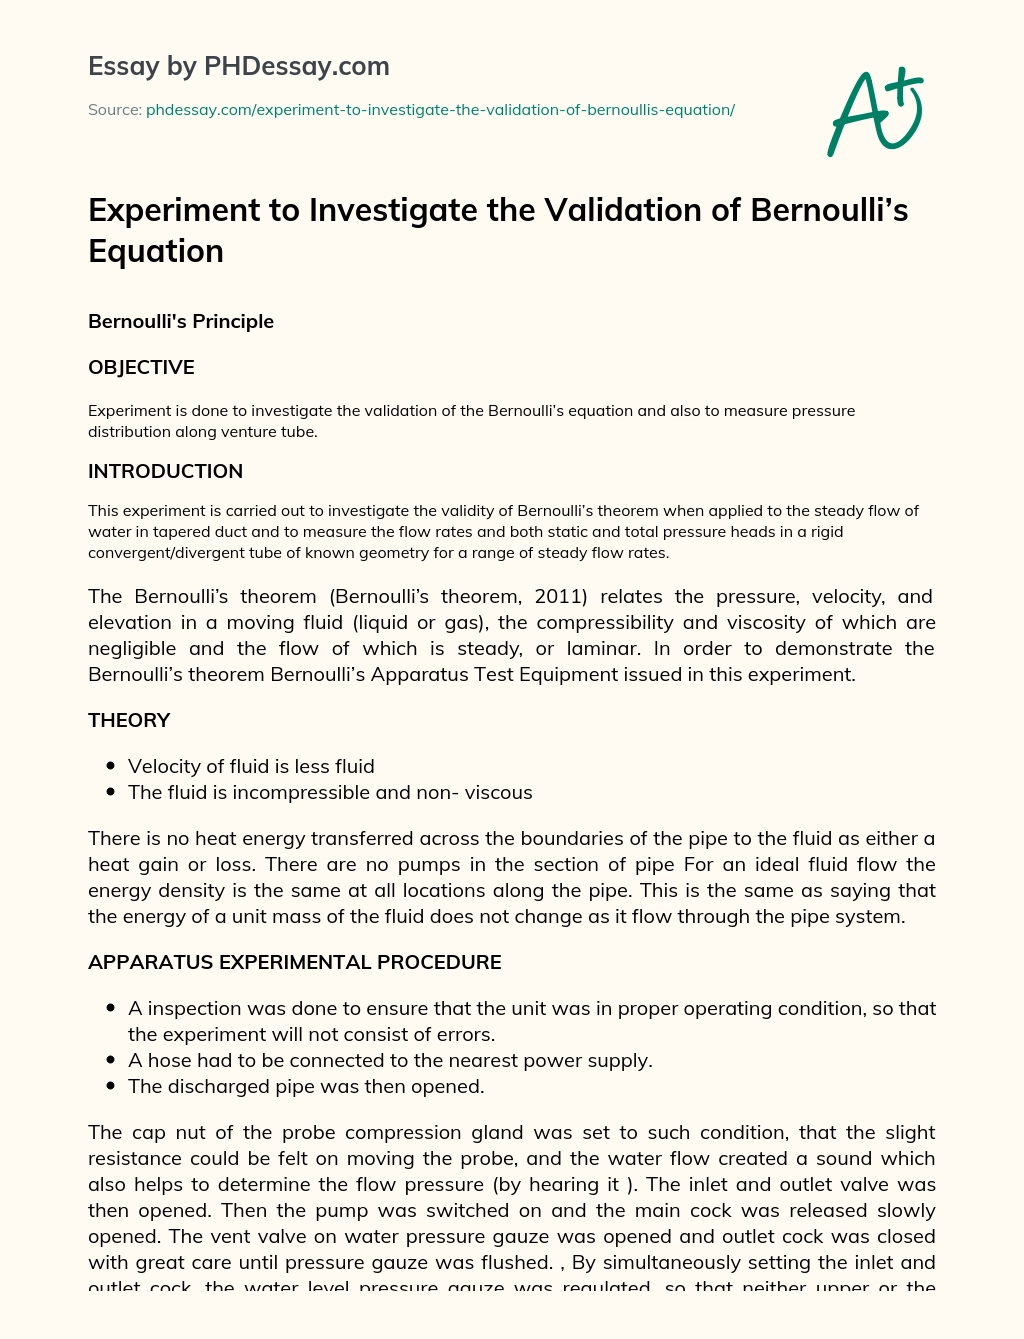 Experiment to Investigate the Validation of Bernoulli’s Equation essay